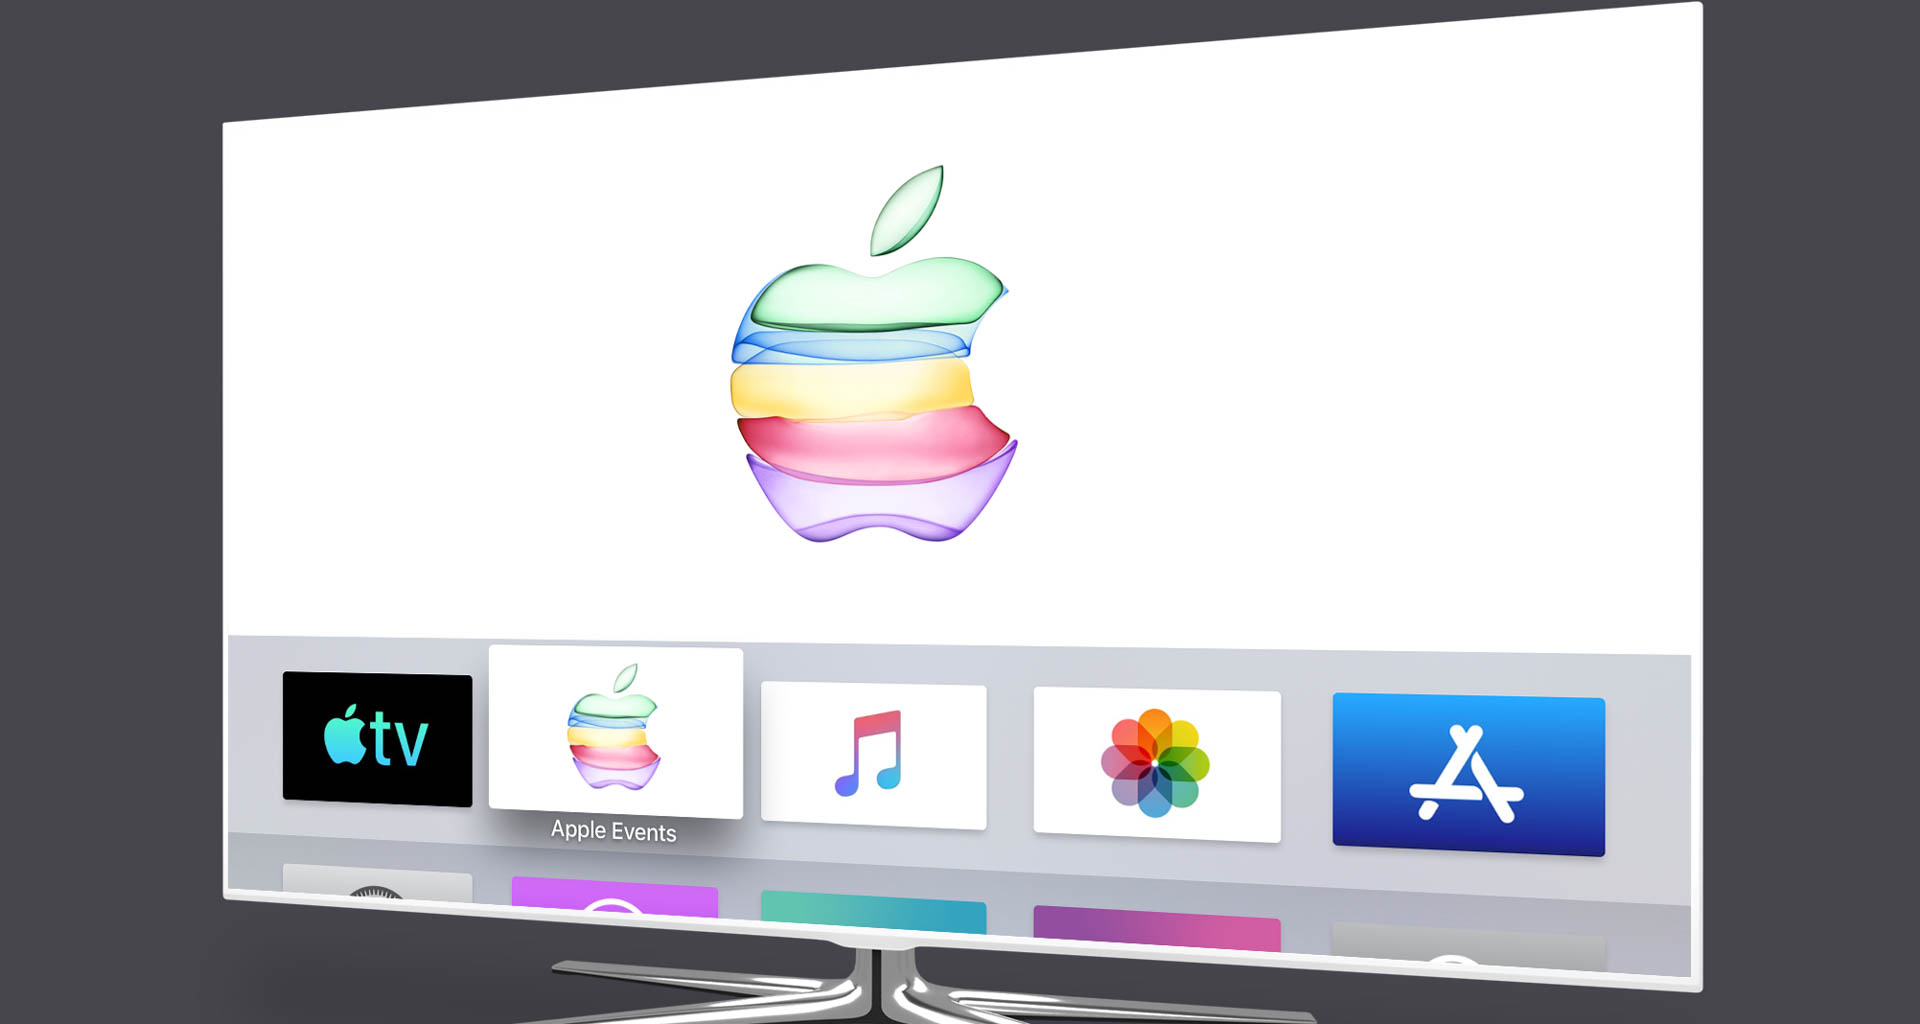 Looking for a big screen experience? Download the Apple Events app on tvOS and watch live. Image: Digitized House | TV illustration courtesy of ApplyPixels.